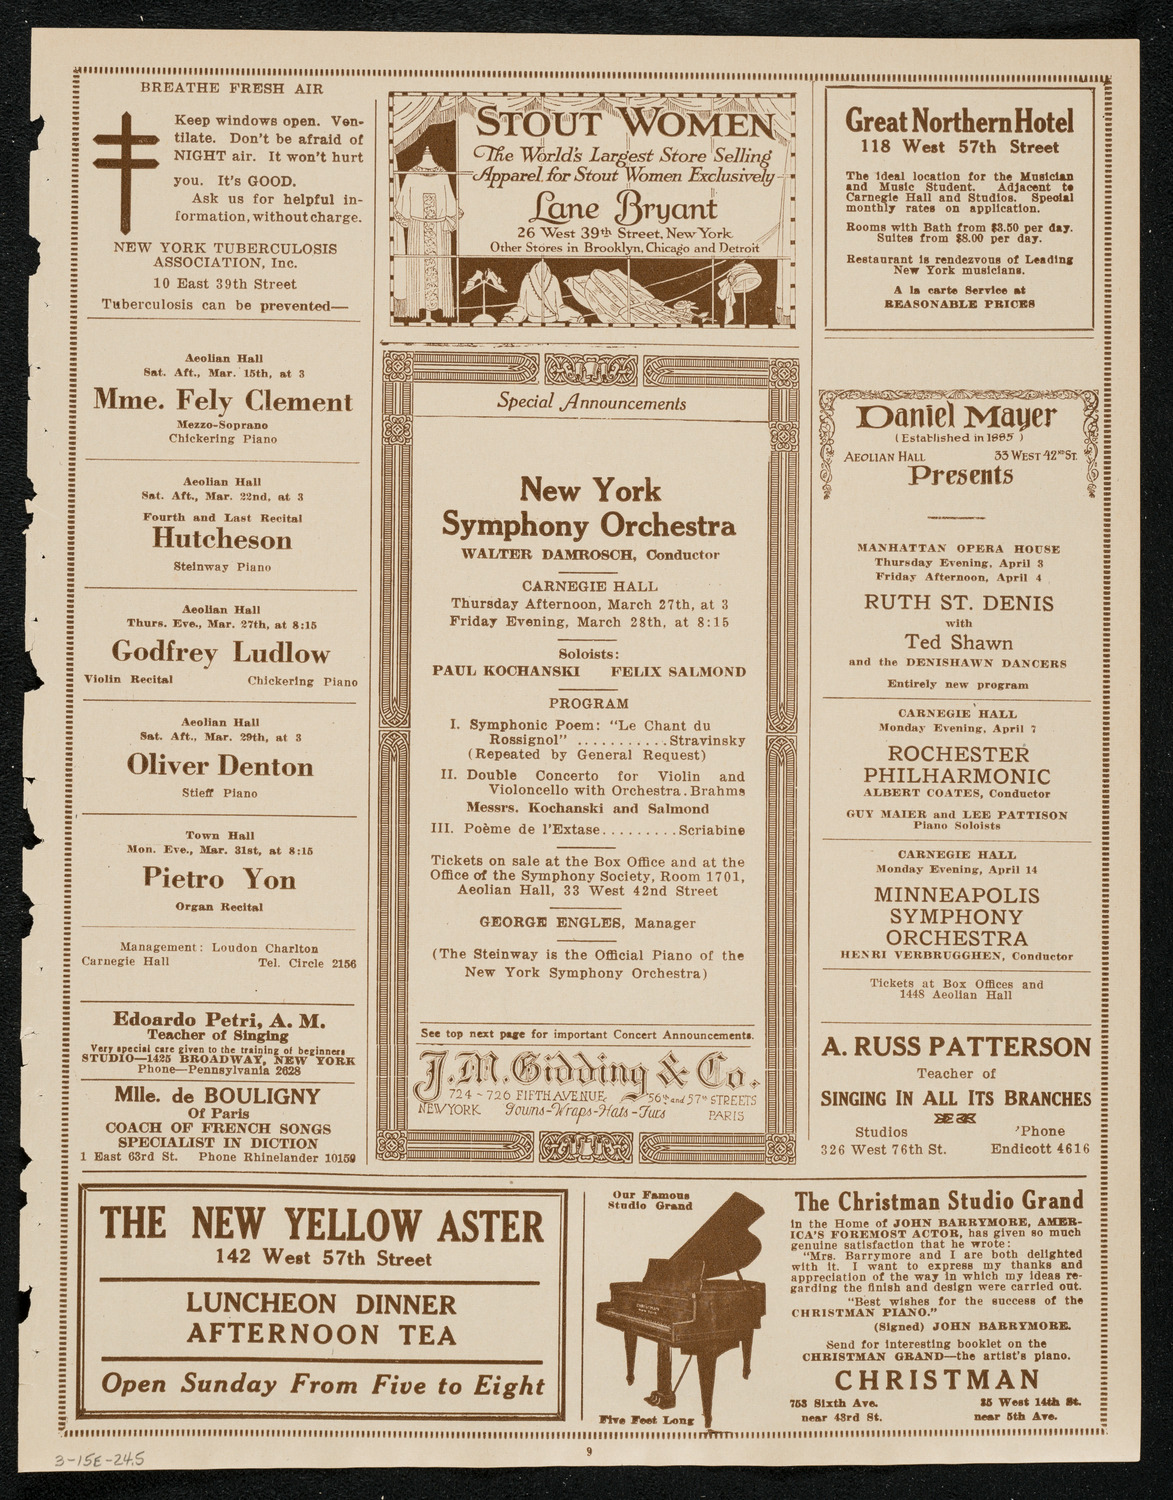 Jewish National Workers Alliance Chorus, March 15, 1924, program page 9